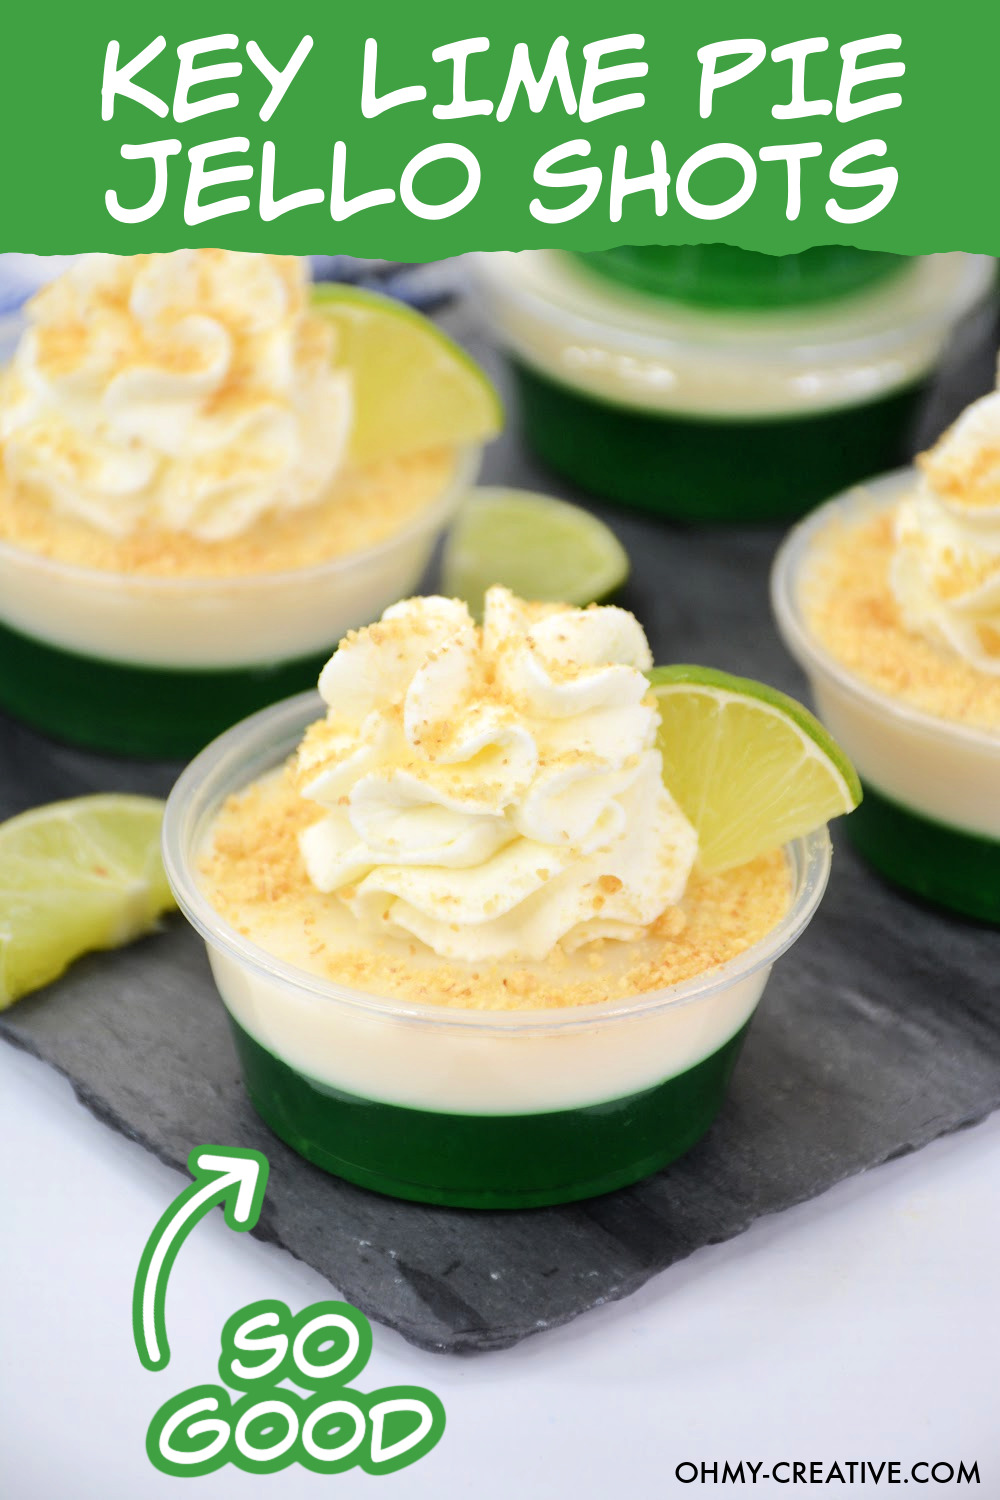 These Key Lime Pie Jello Shots have a layer of lime Jell-o and a layer of creamy key lime pie filling topped with whipped cream and a sprinkle of gram cracker and a lime wedge.